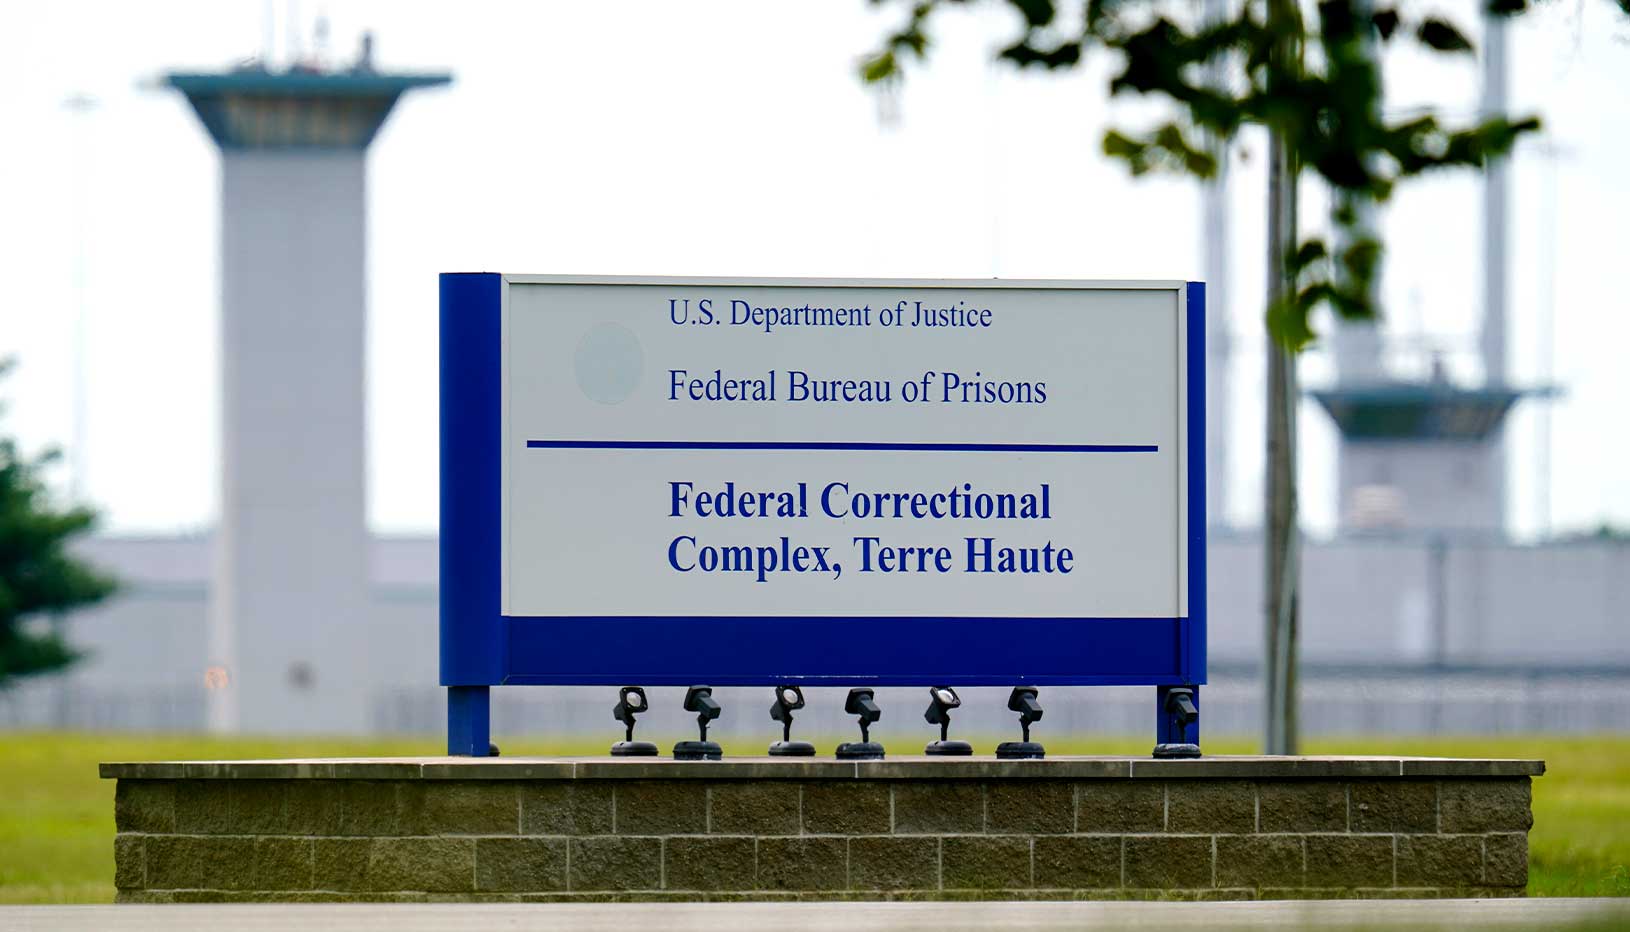 The entrance to the federal prison in Terre Haute, Indiana